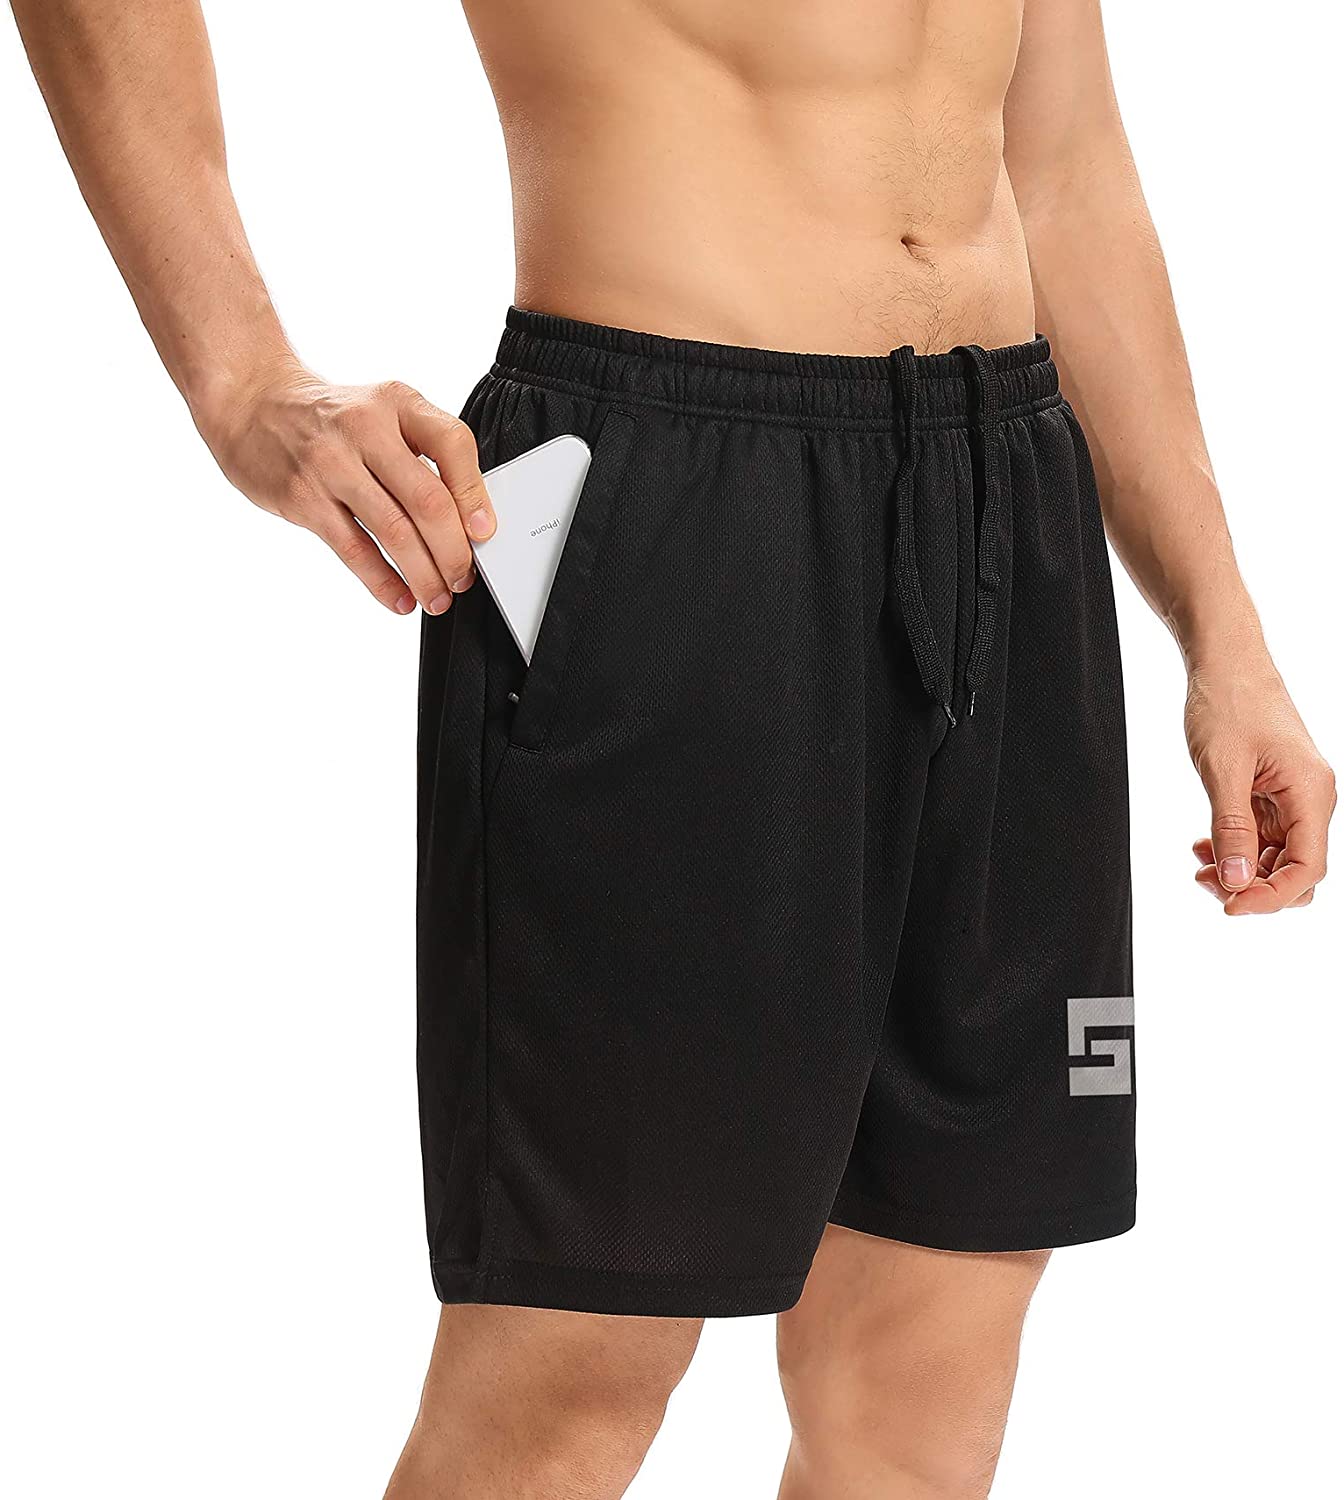 LXNMGO Men's 7 Workout Running Shorts Quick Dry Lightweight Athletic Gym Shorts with Zip Pockets